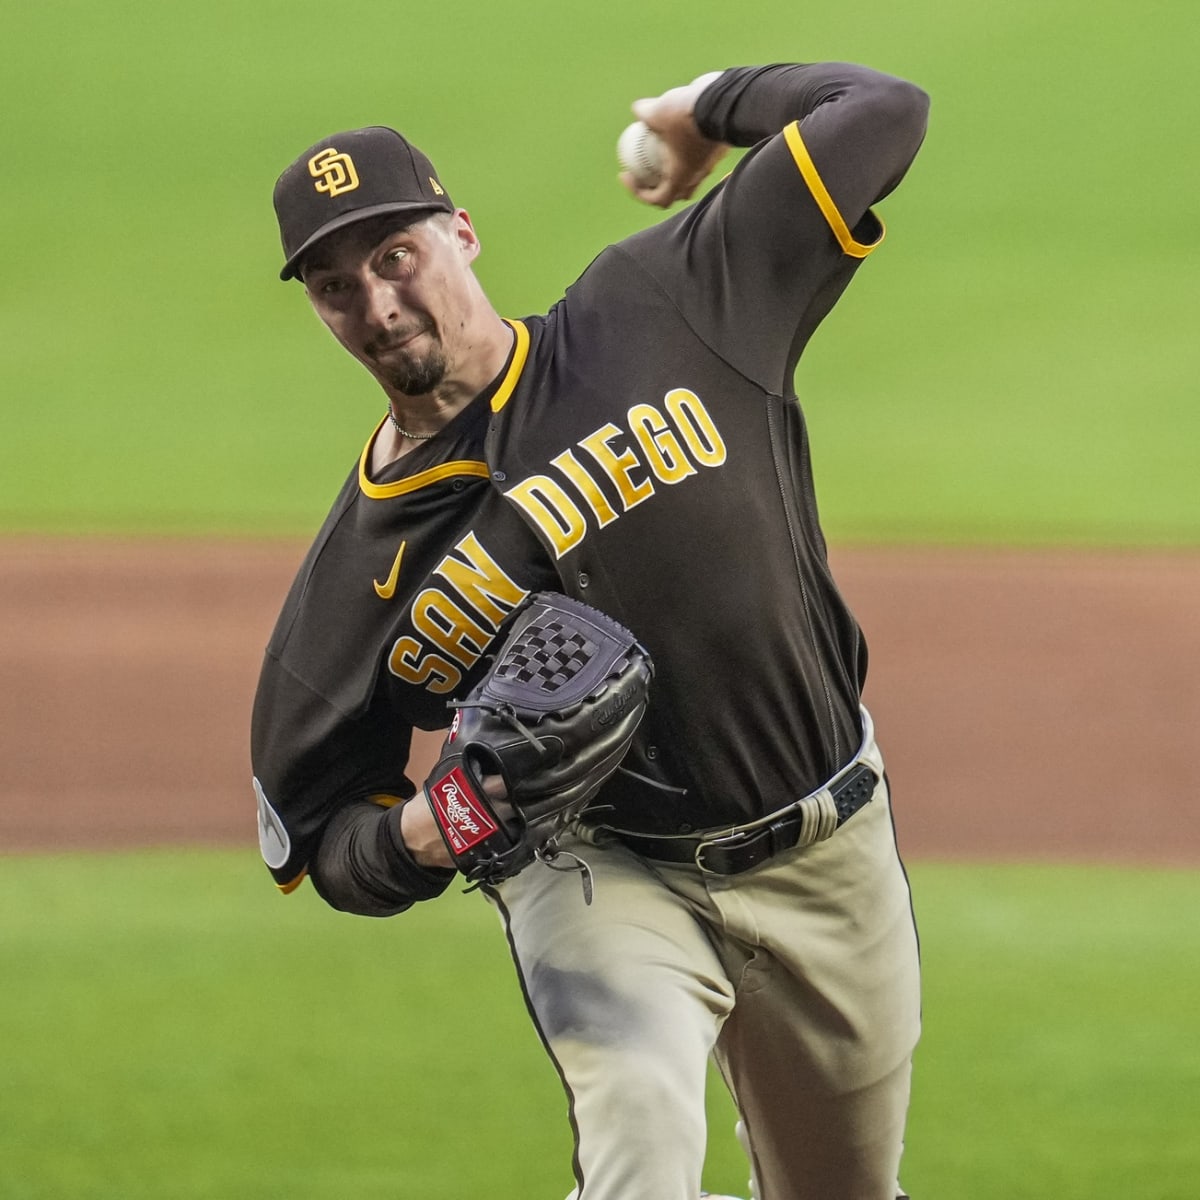 Padres bullpen seeks to be just as good, not as bad - The San